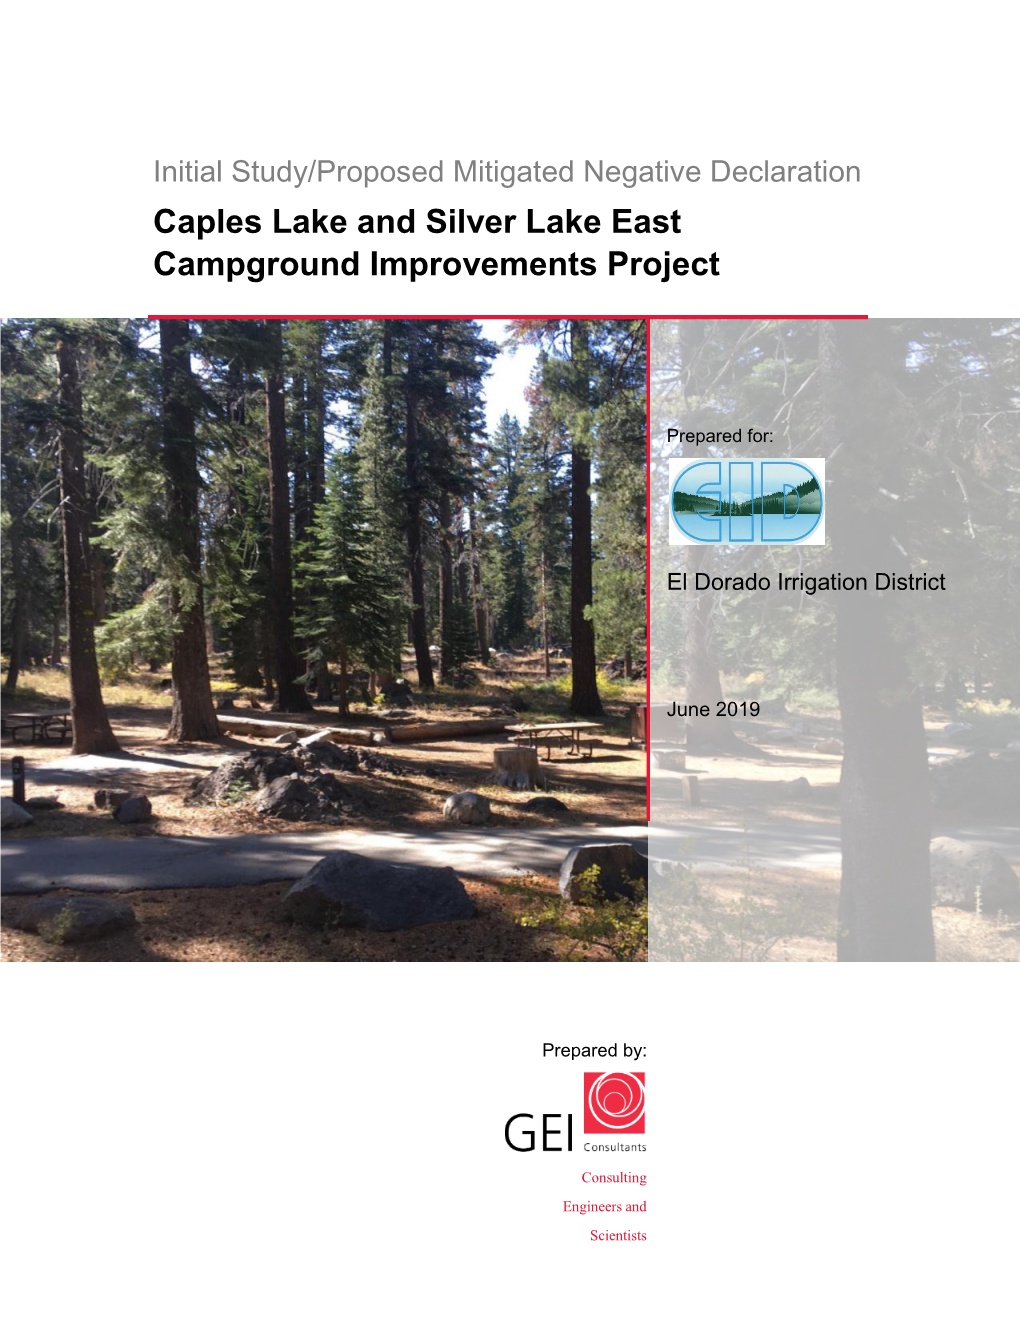 Caples Lake and Silver Lake East Campground Improvements Project